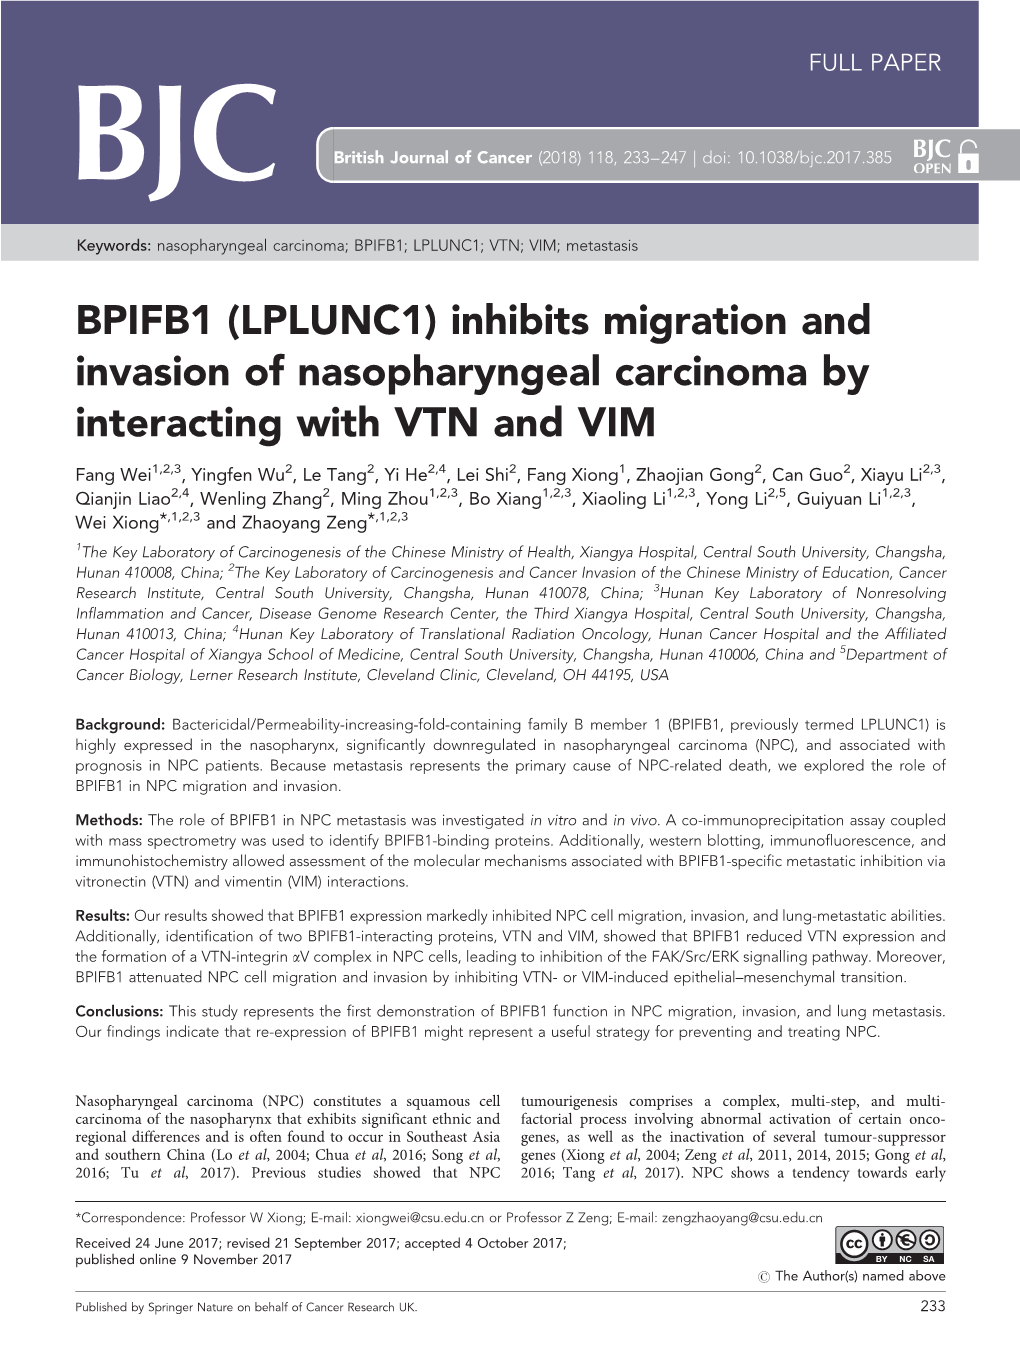 BPIFB1 (LPLUNC1) Inhibits Migration and Invasion of Nasopharyngeal Carcinoma by Interacting with VTN and VIM